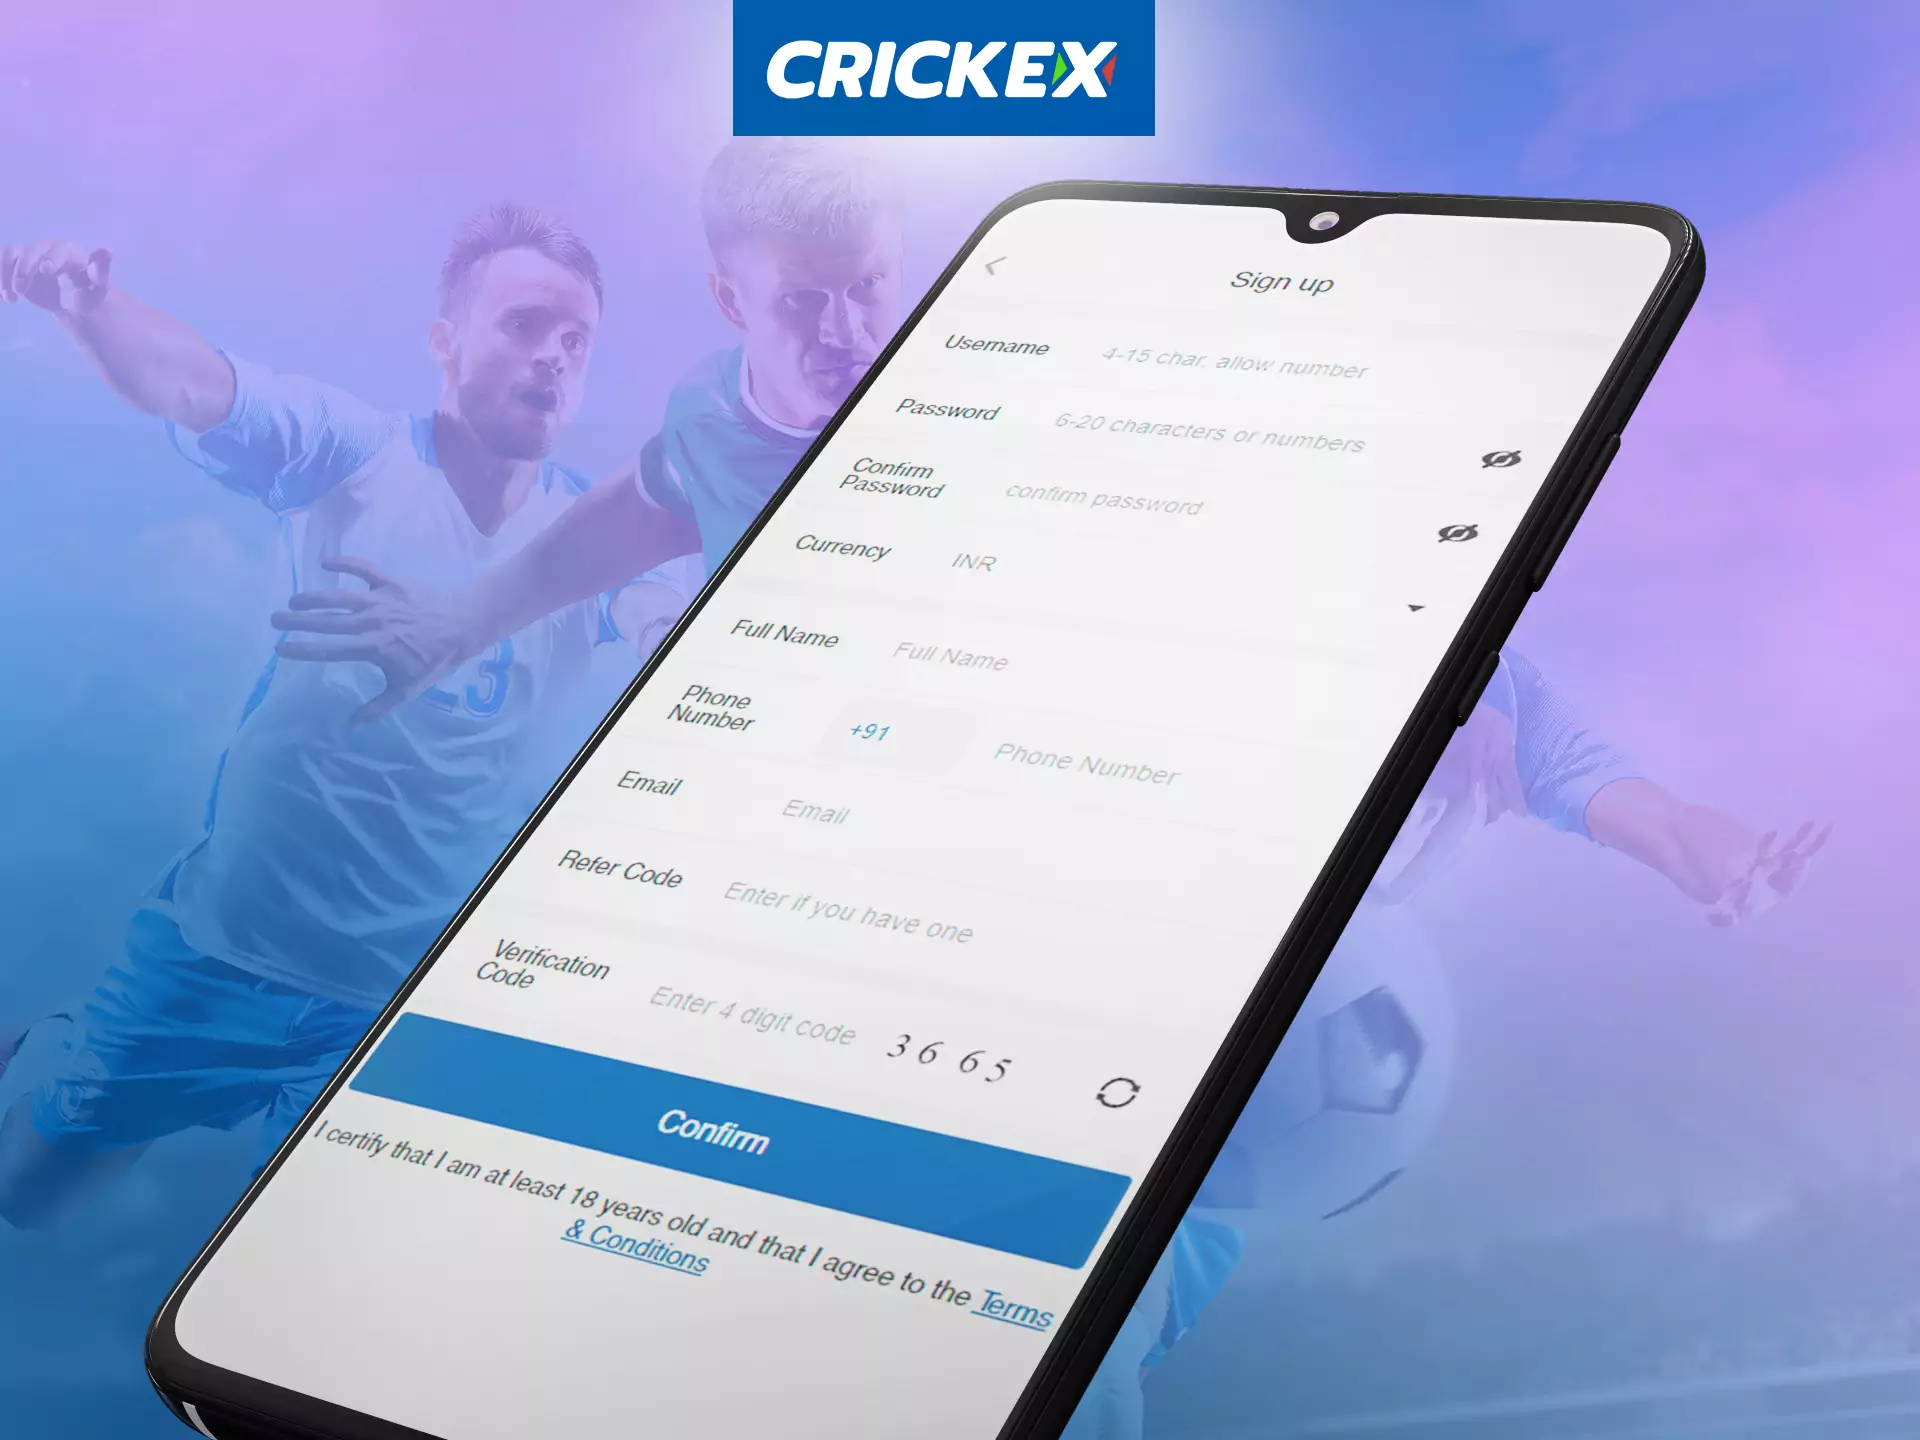 Complete a simple registration on the Crickex app.